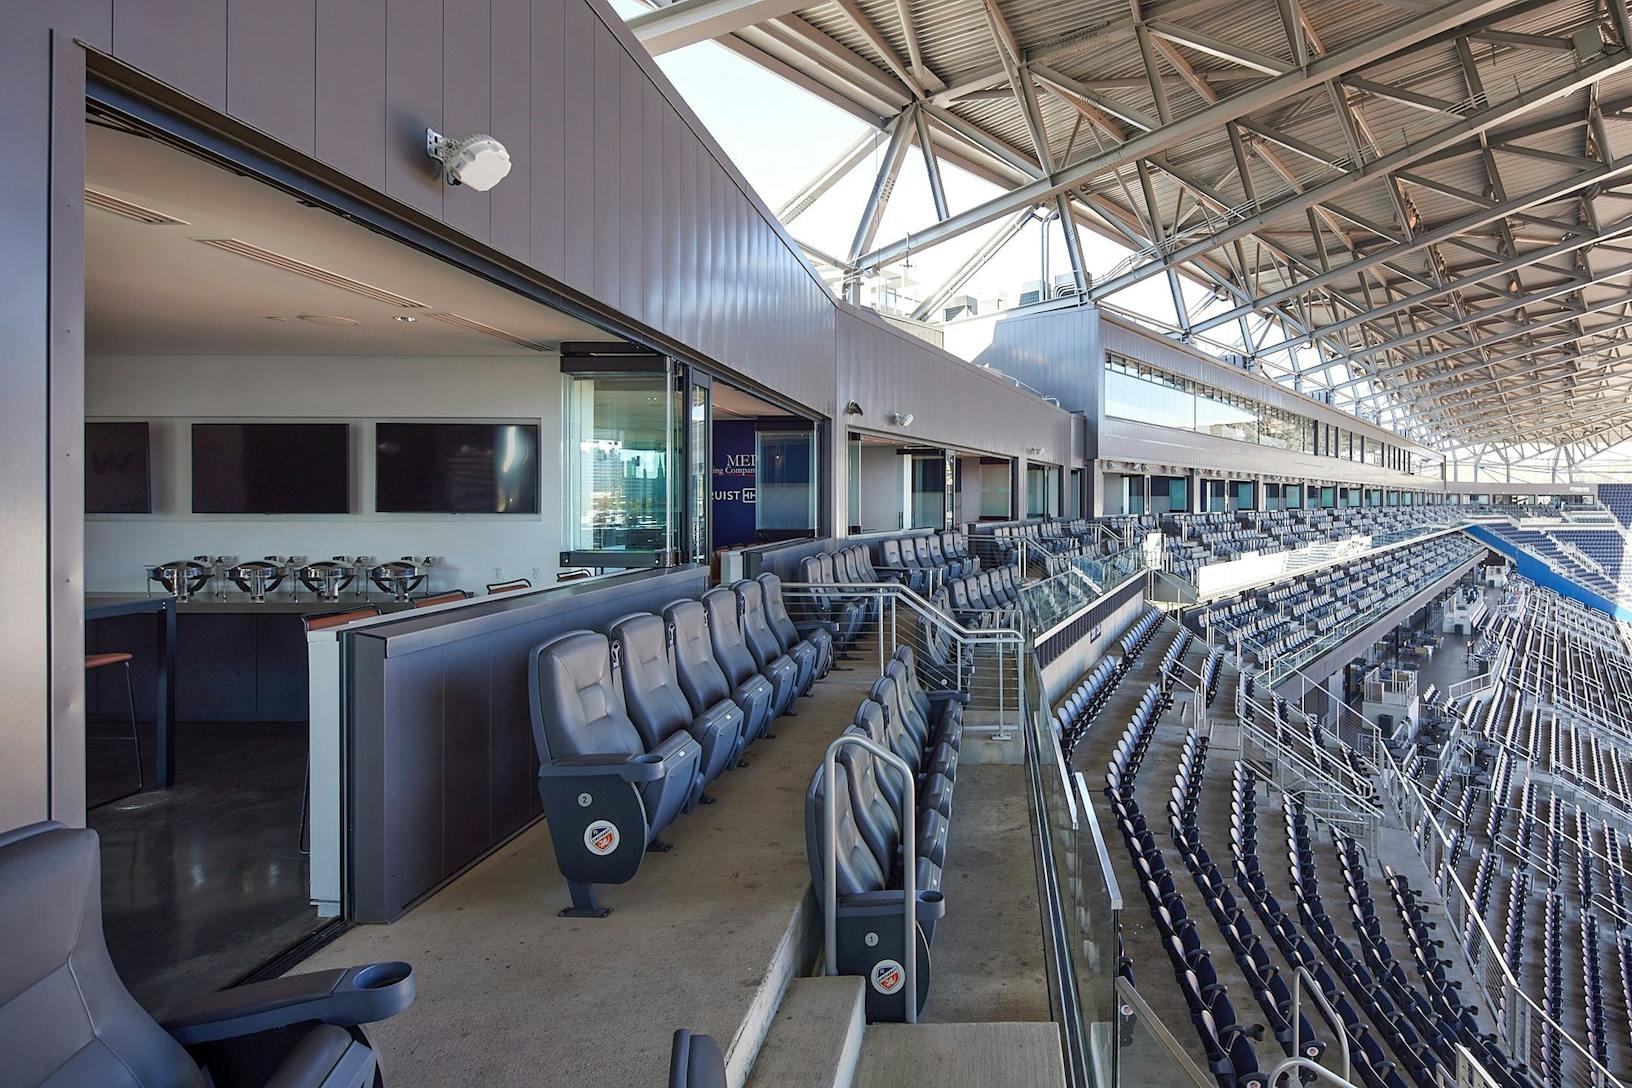 The inside of the TQL stadium with rows of seats - frameless glass panels